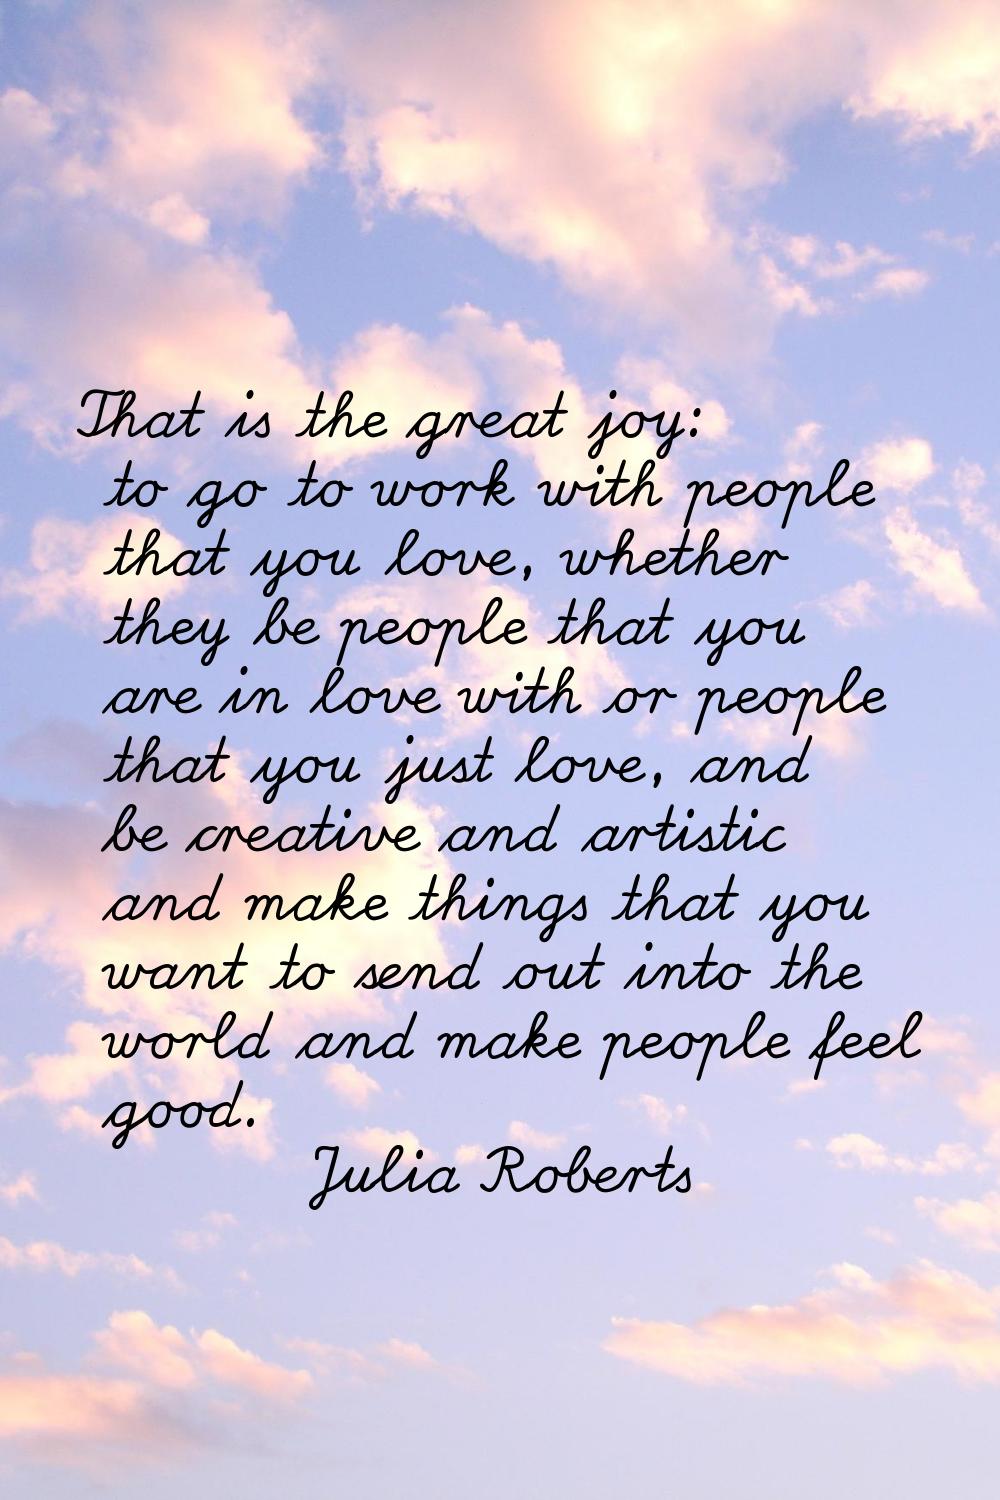 That is the great joy: to go to work with people that you love, whether they be people that you are